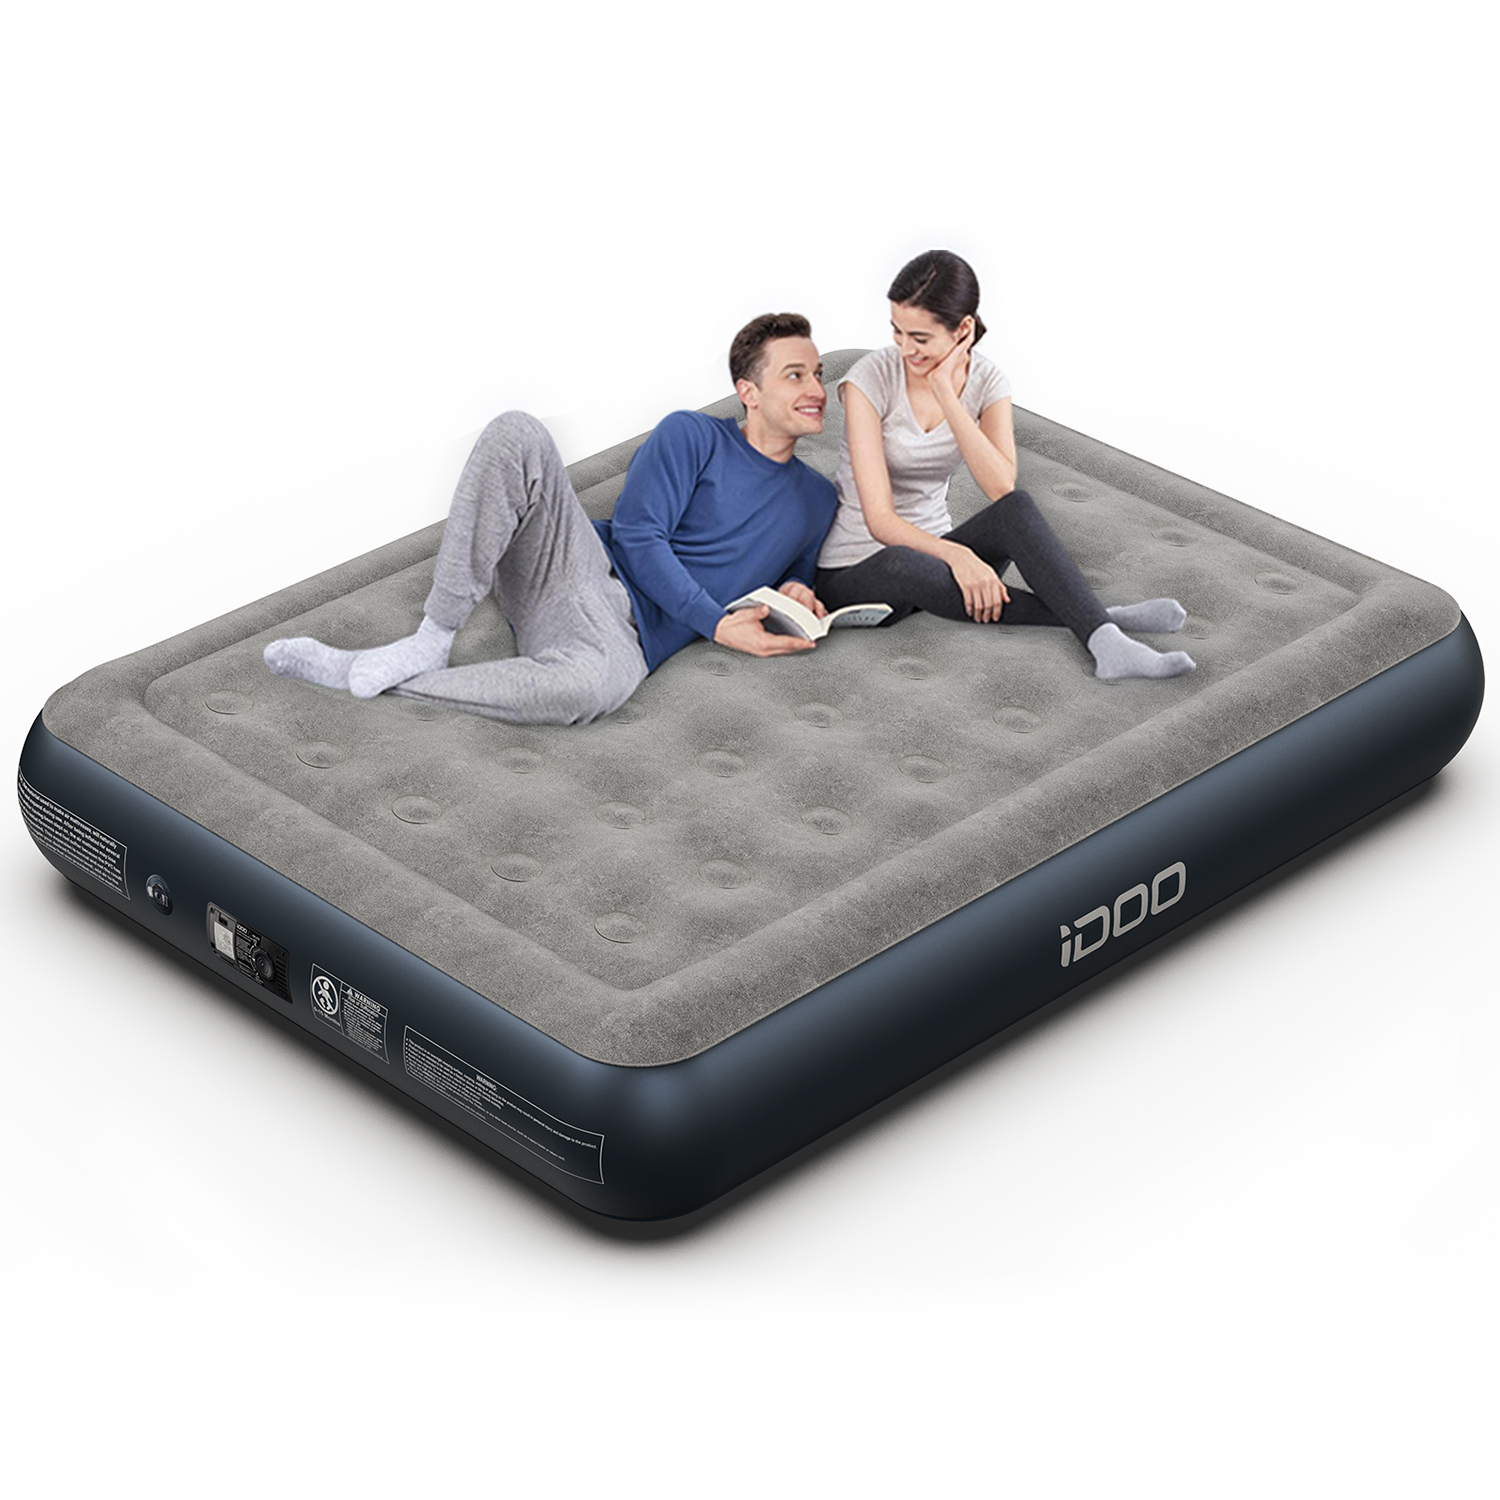 iDOO Queen Size Air Mattress, Inflatable Airbed with Built-in Pump, 650lb MAX - image 1 of 10